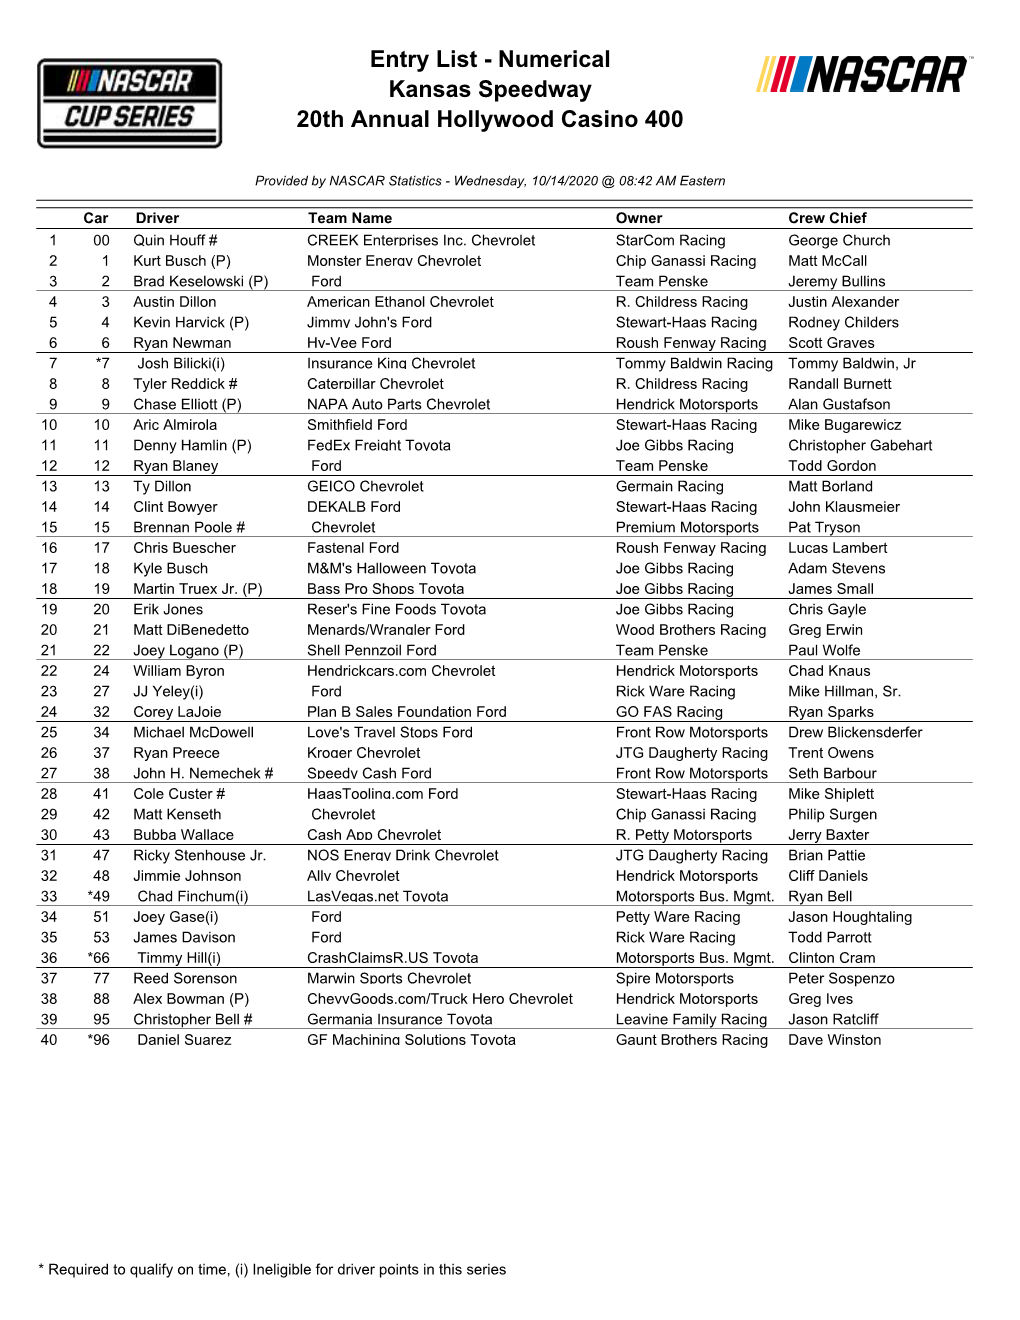 Entry List - Numerical Kansas Speedway 20Th Annual Hollywood Casino 400